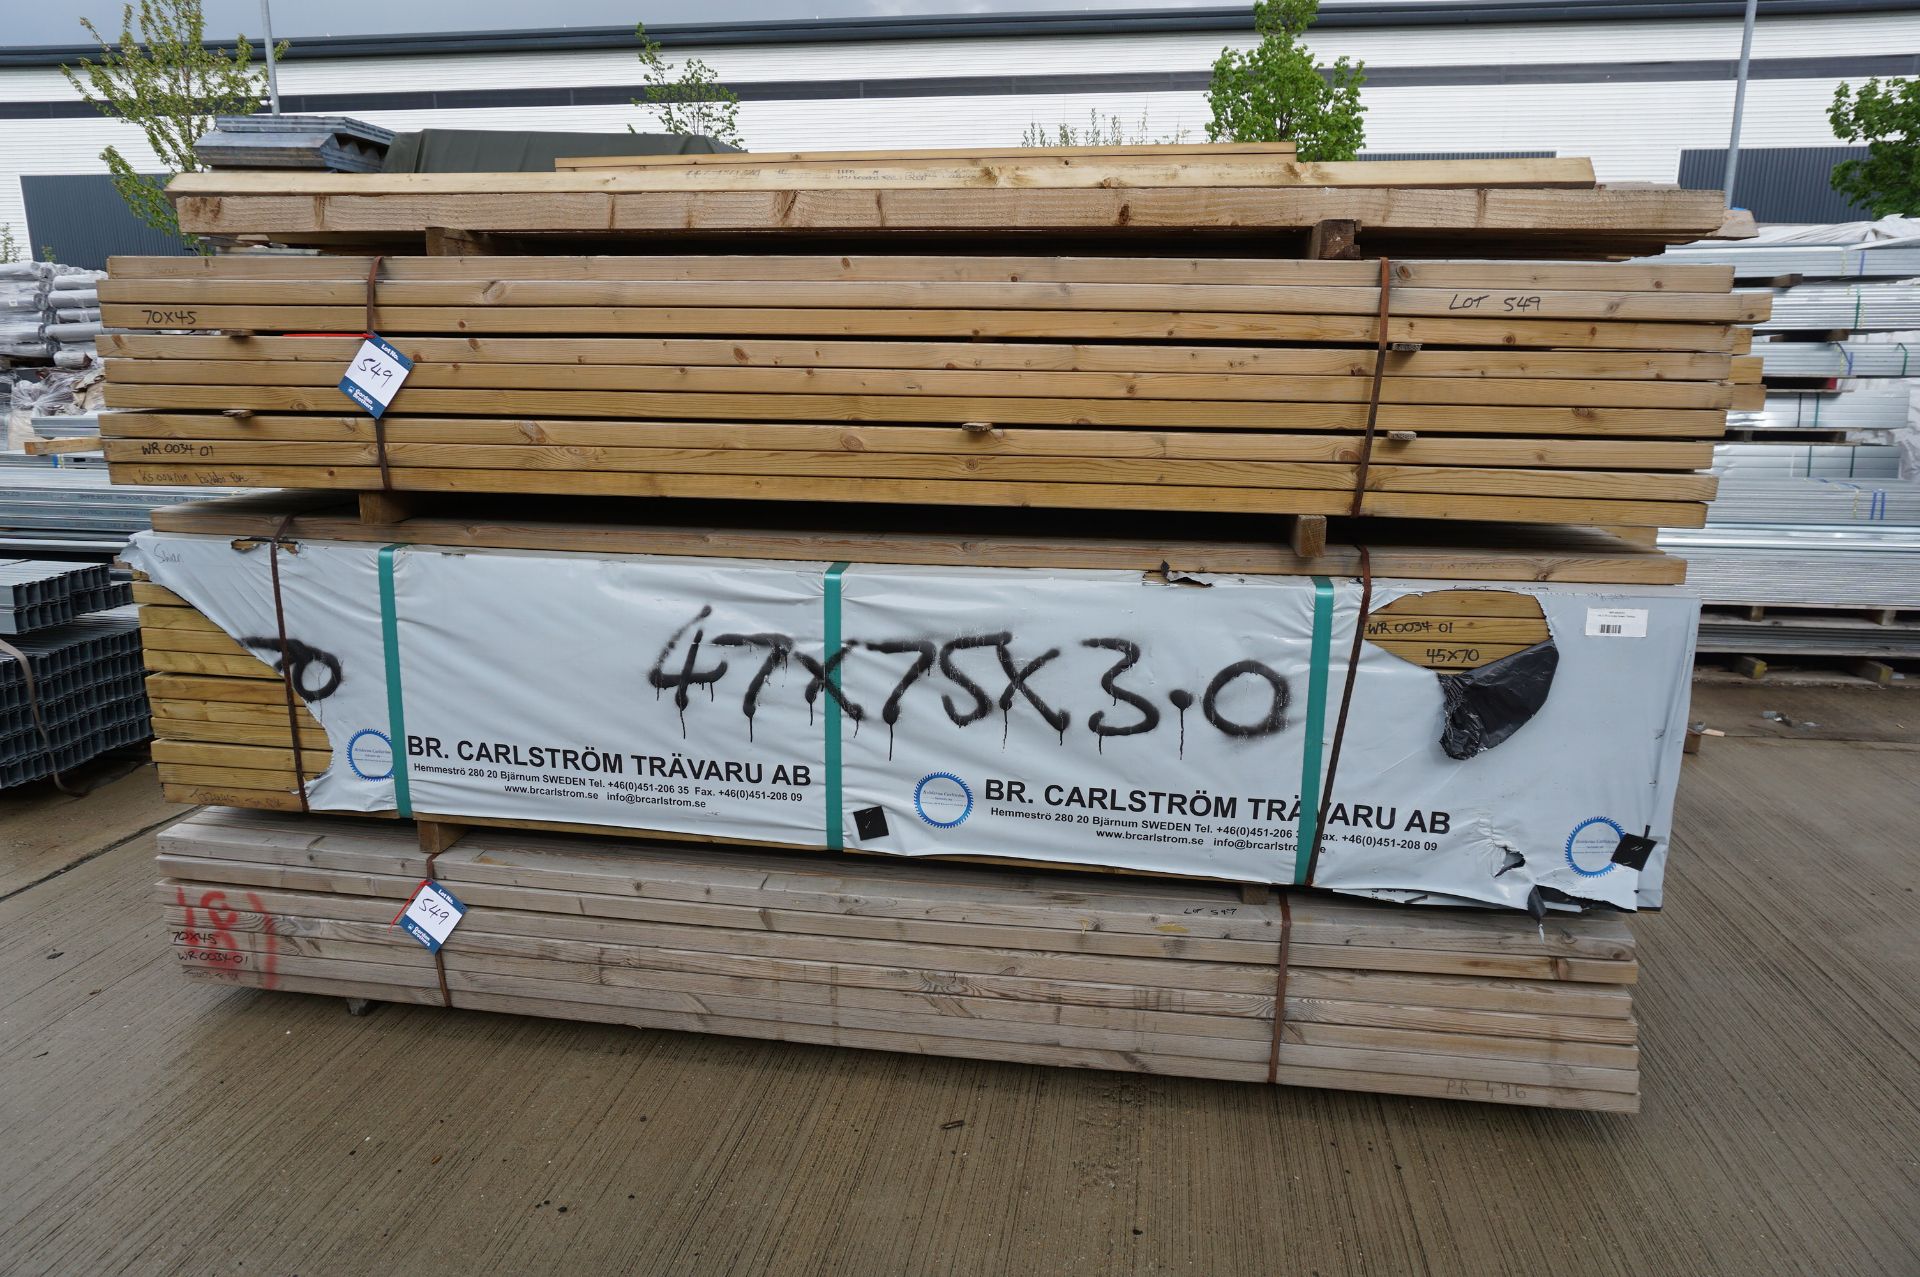 250x (no.) pressure treated timber lengths, 3m x 45mm x 70mm